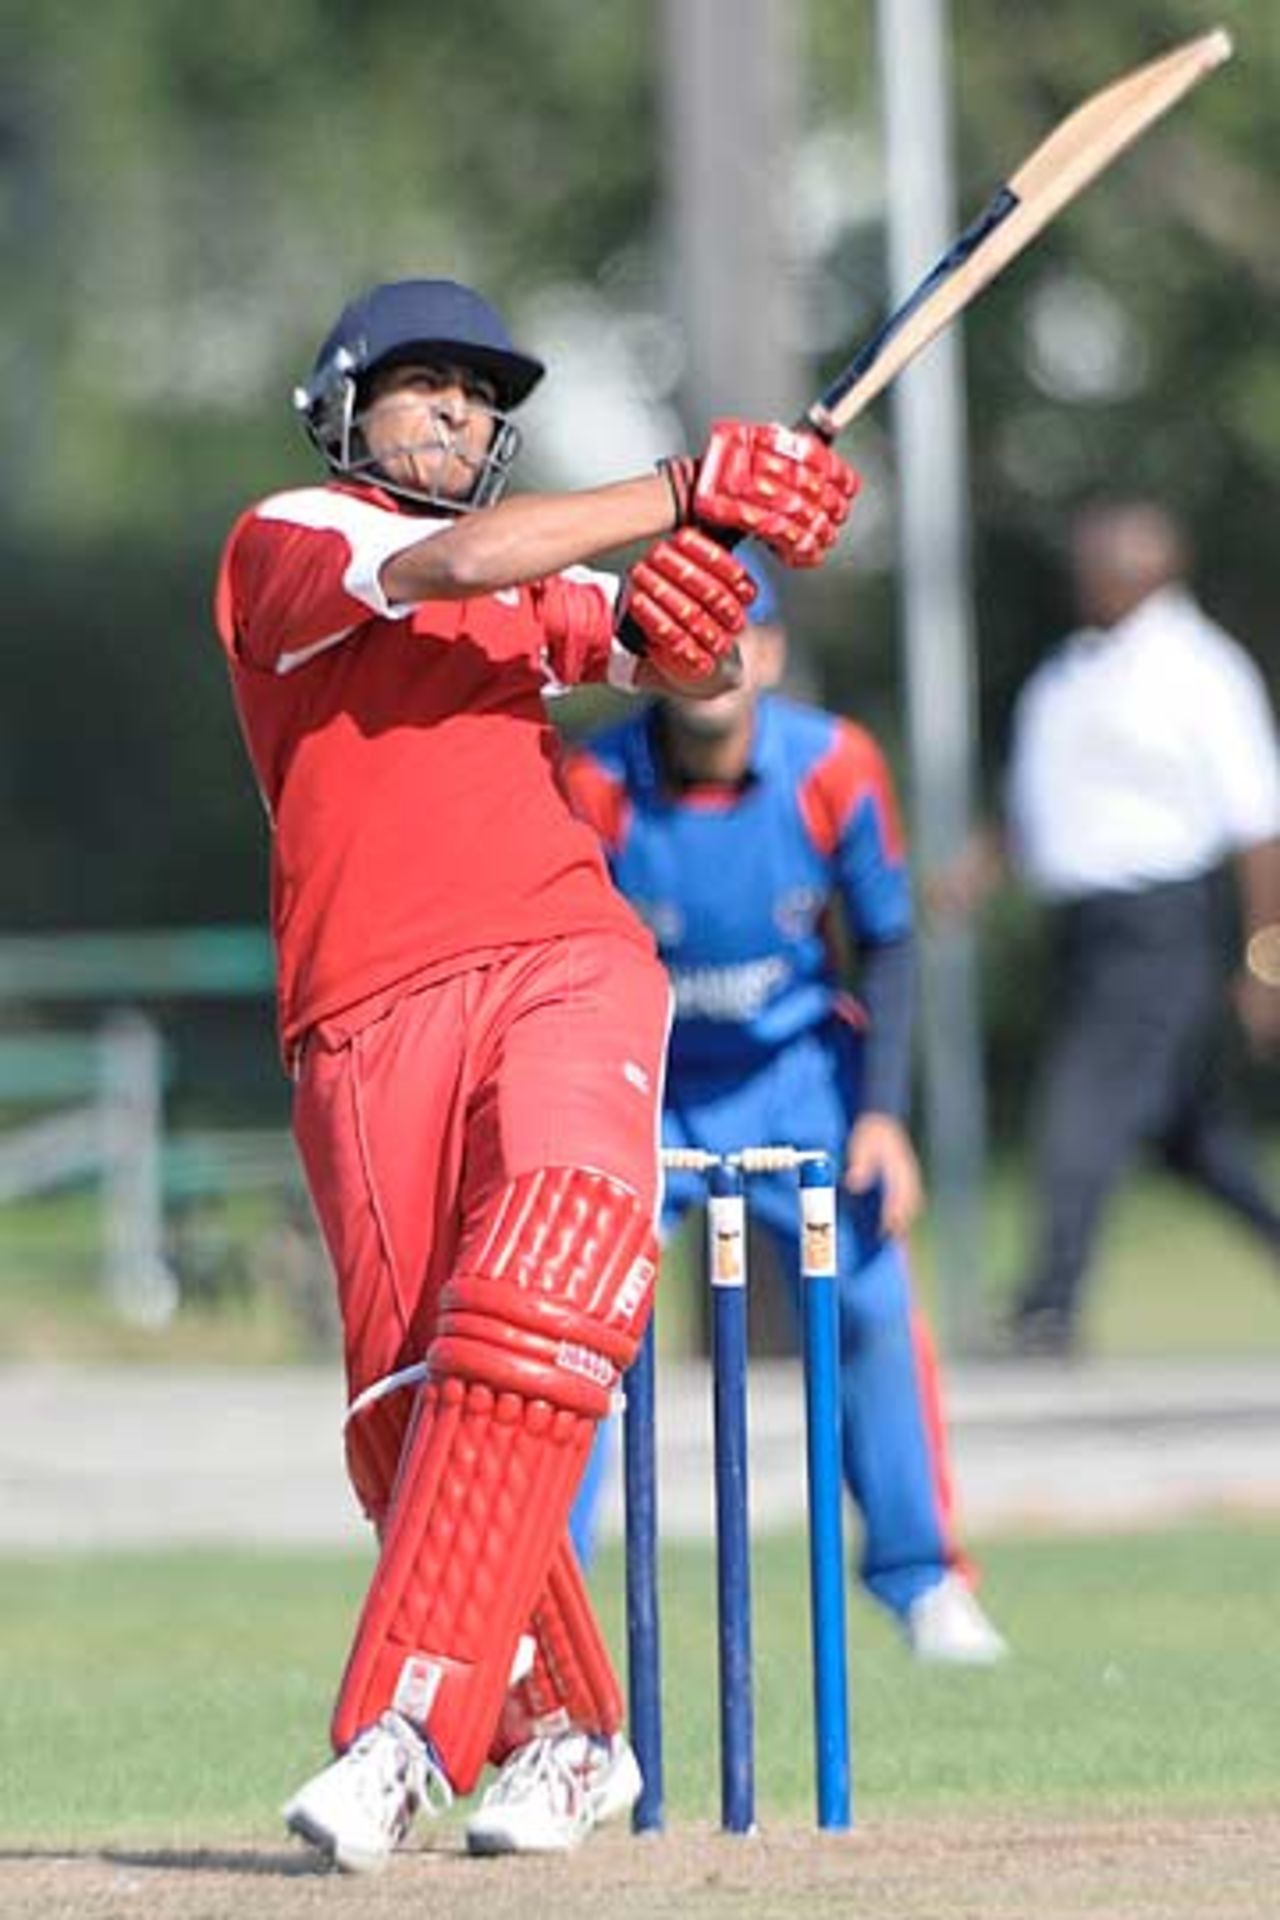 Asif Khan batting against Afghanistan at the ICC Under-19 Cricket World Cup Qualifier in Toronto, Canada